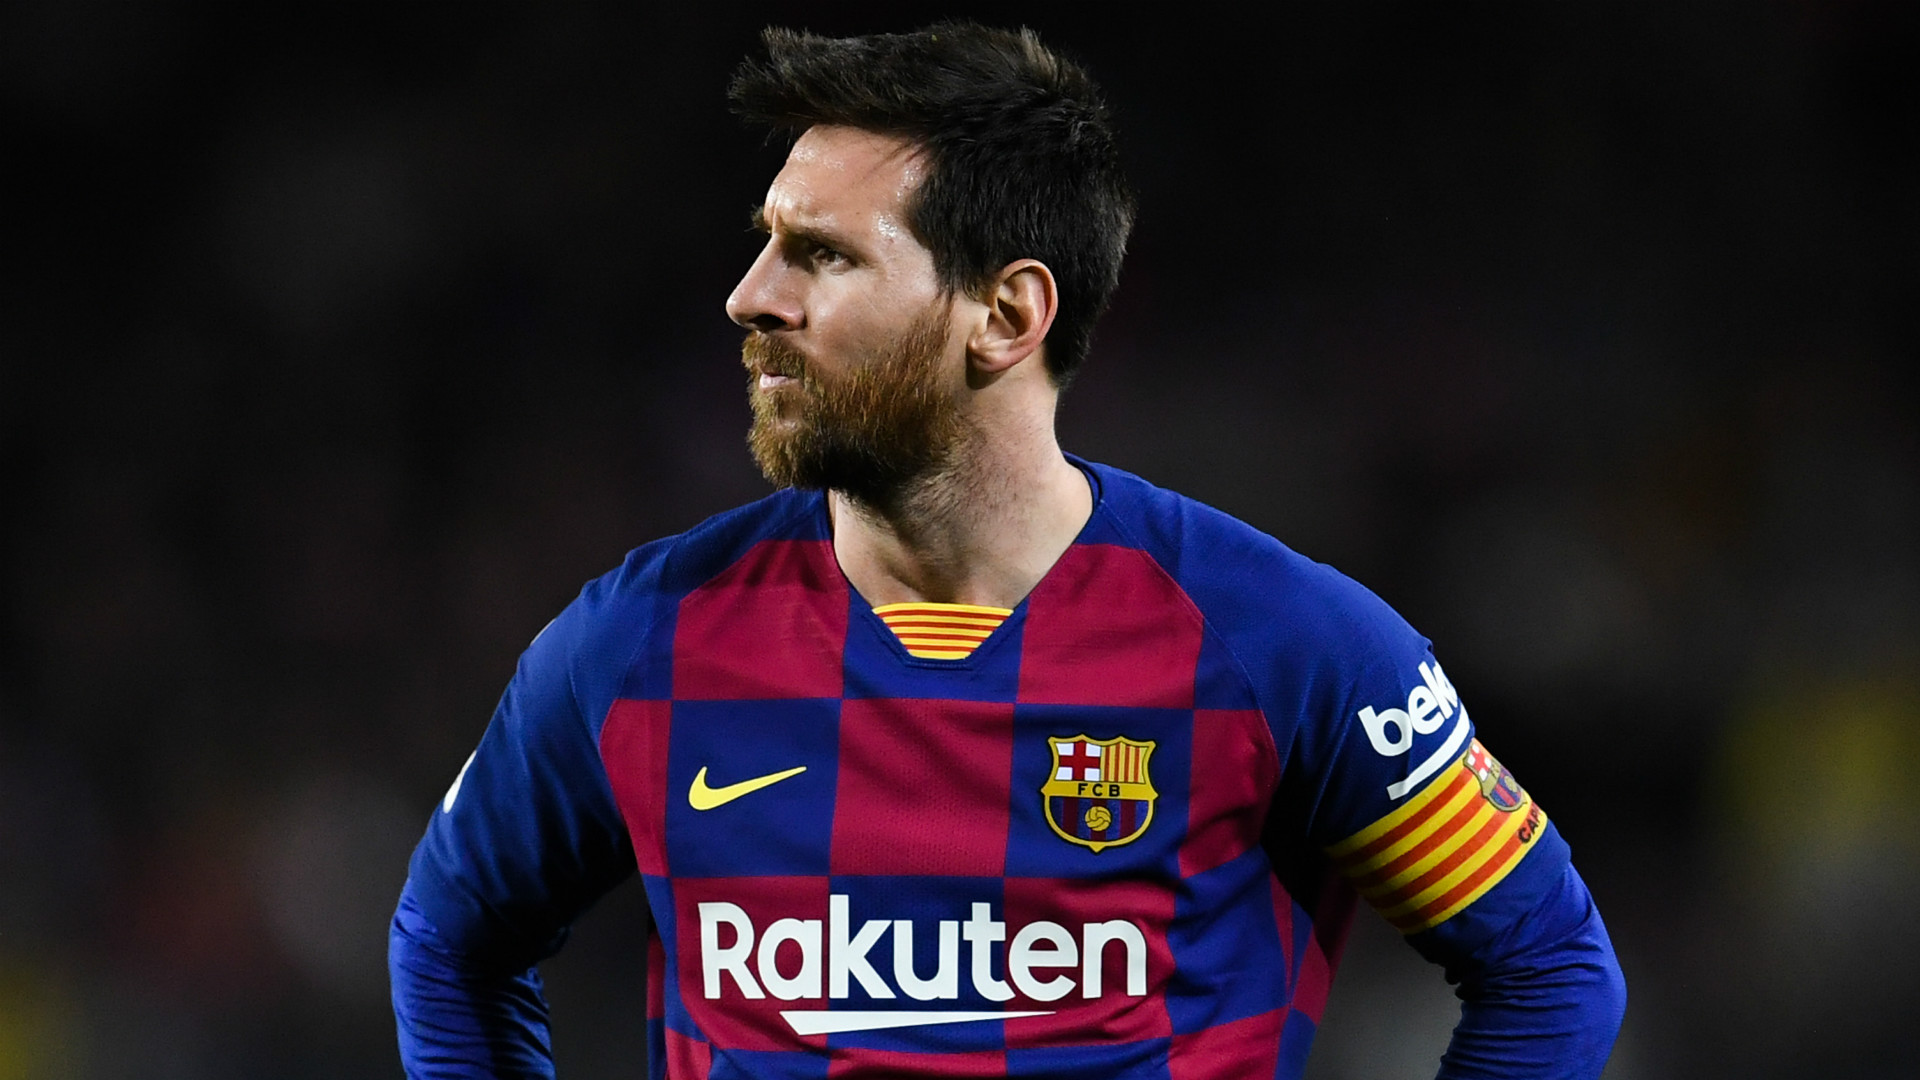 ‘Messi won’t want rest but he needs it’ – Barcelona must manage workload, says Rivaldo